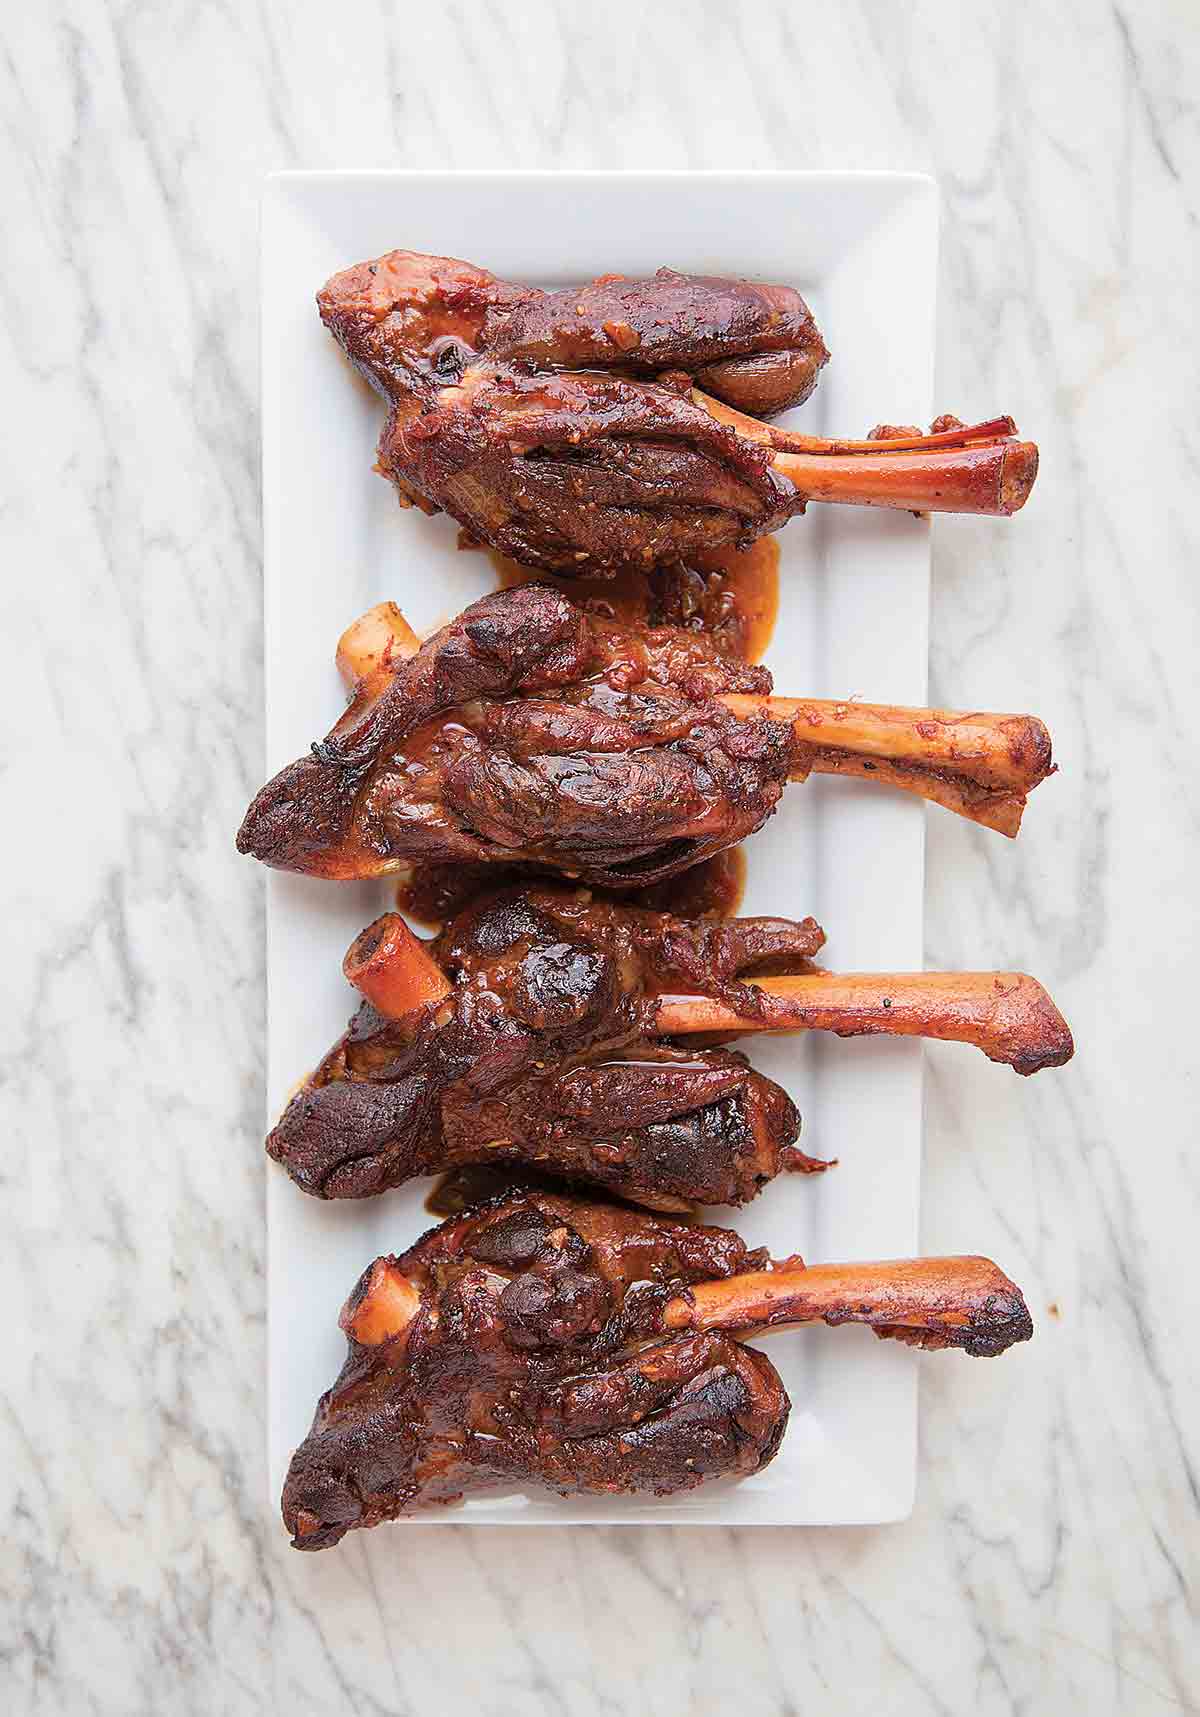 Four lamb shanks with coffee and ancho chile on a rectangular white plate on a white and grey marble surface.